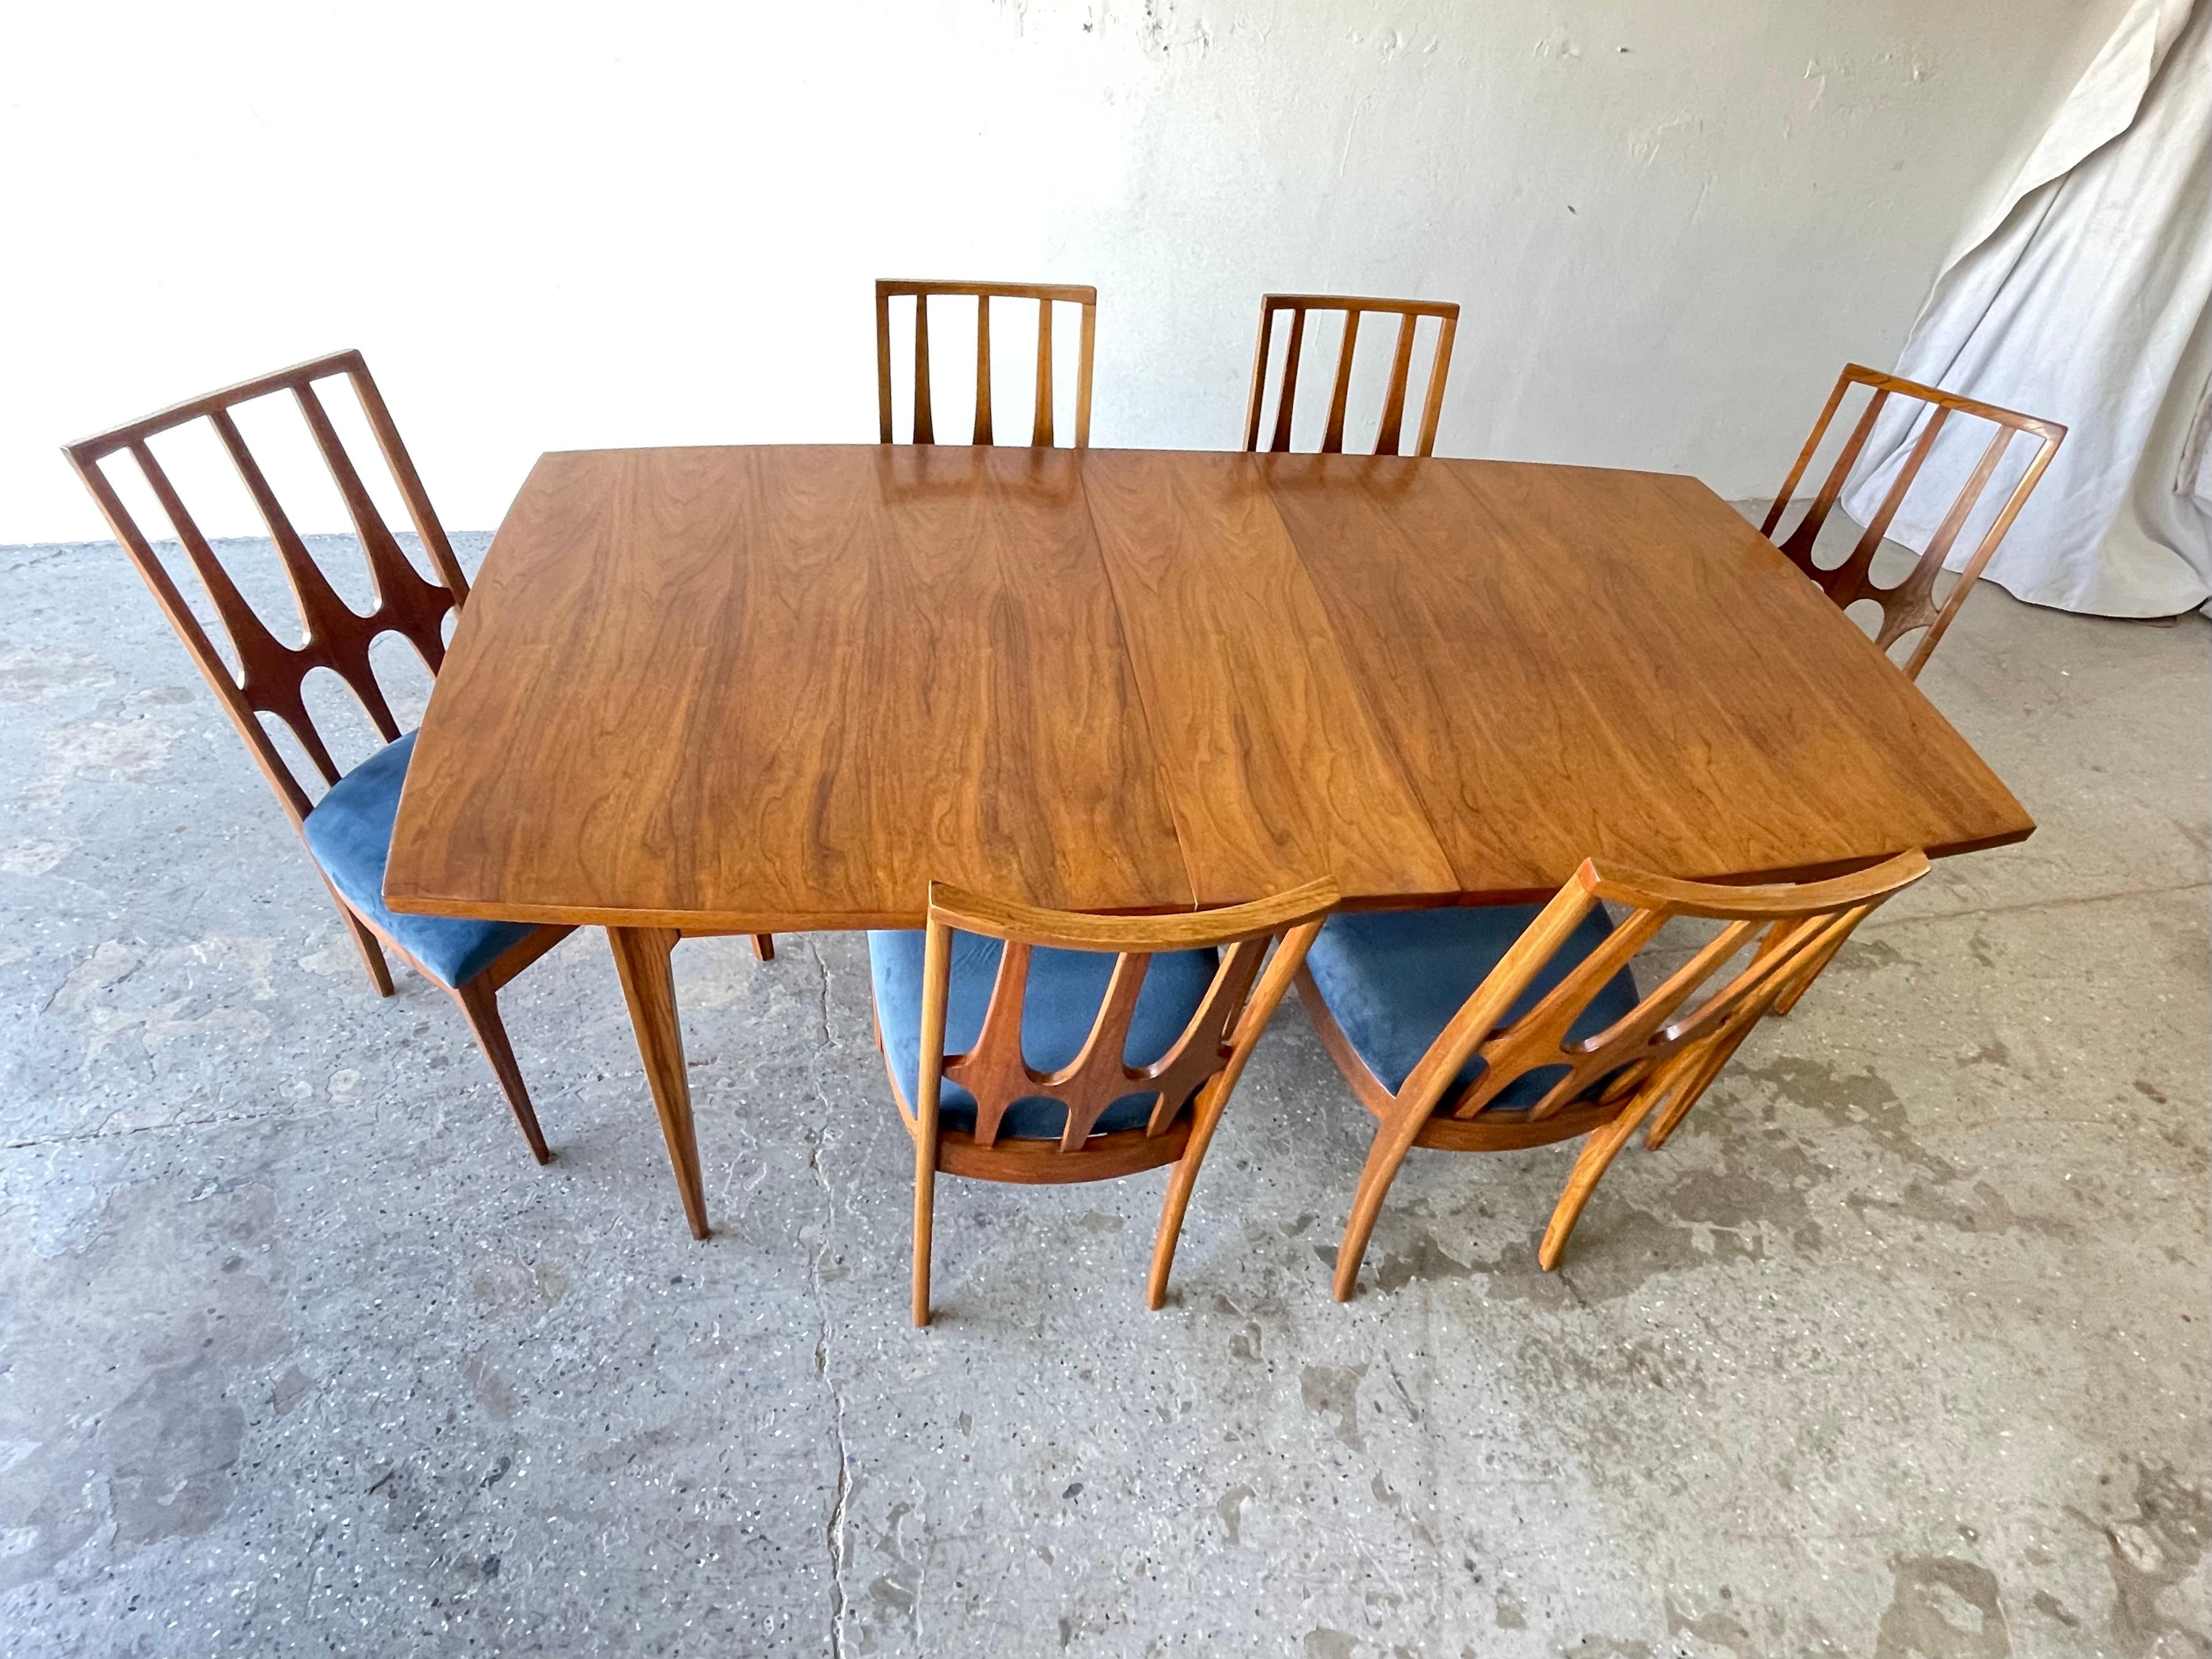 Restored Mid-Century Modern Brasilia dining set


Beautiful Broyhill Brasilia dining set, comes with a table and 6 chairs. This beautiful set is very sturdy. And timeless style. The table has been refinished and the wood grain is beautiful. The